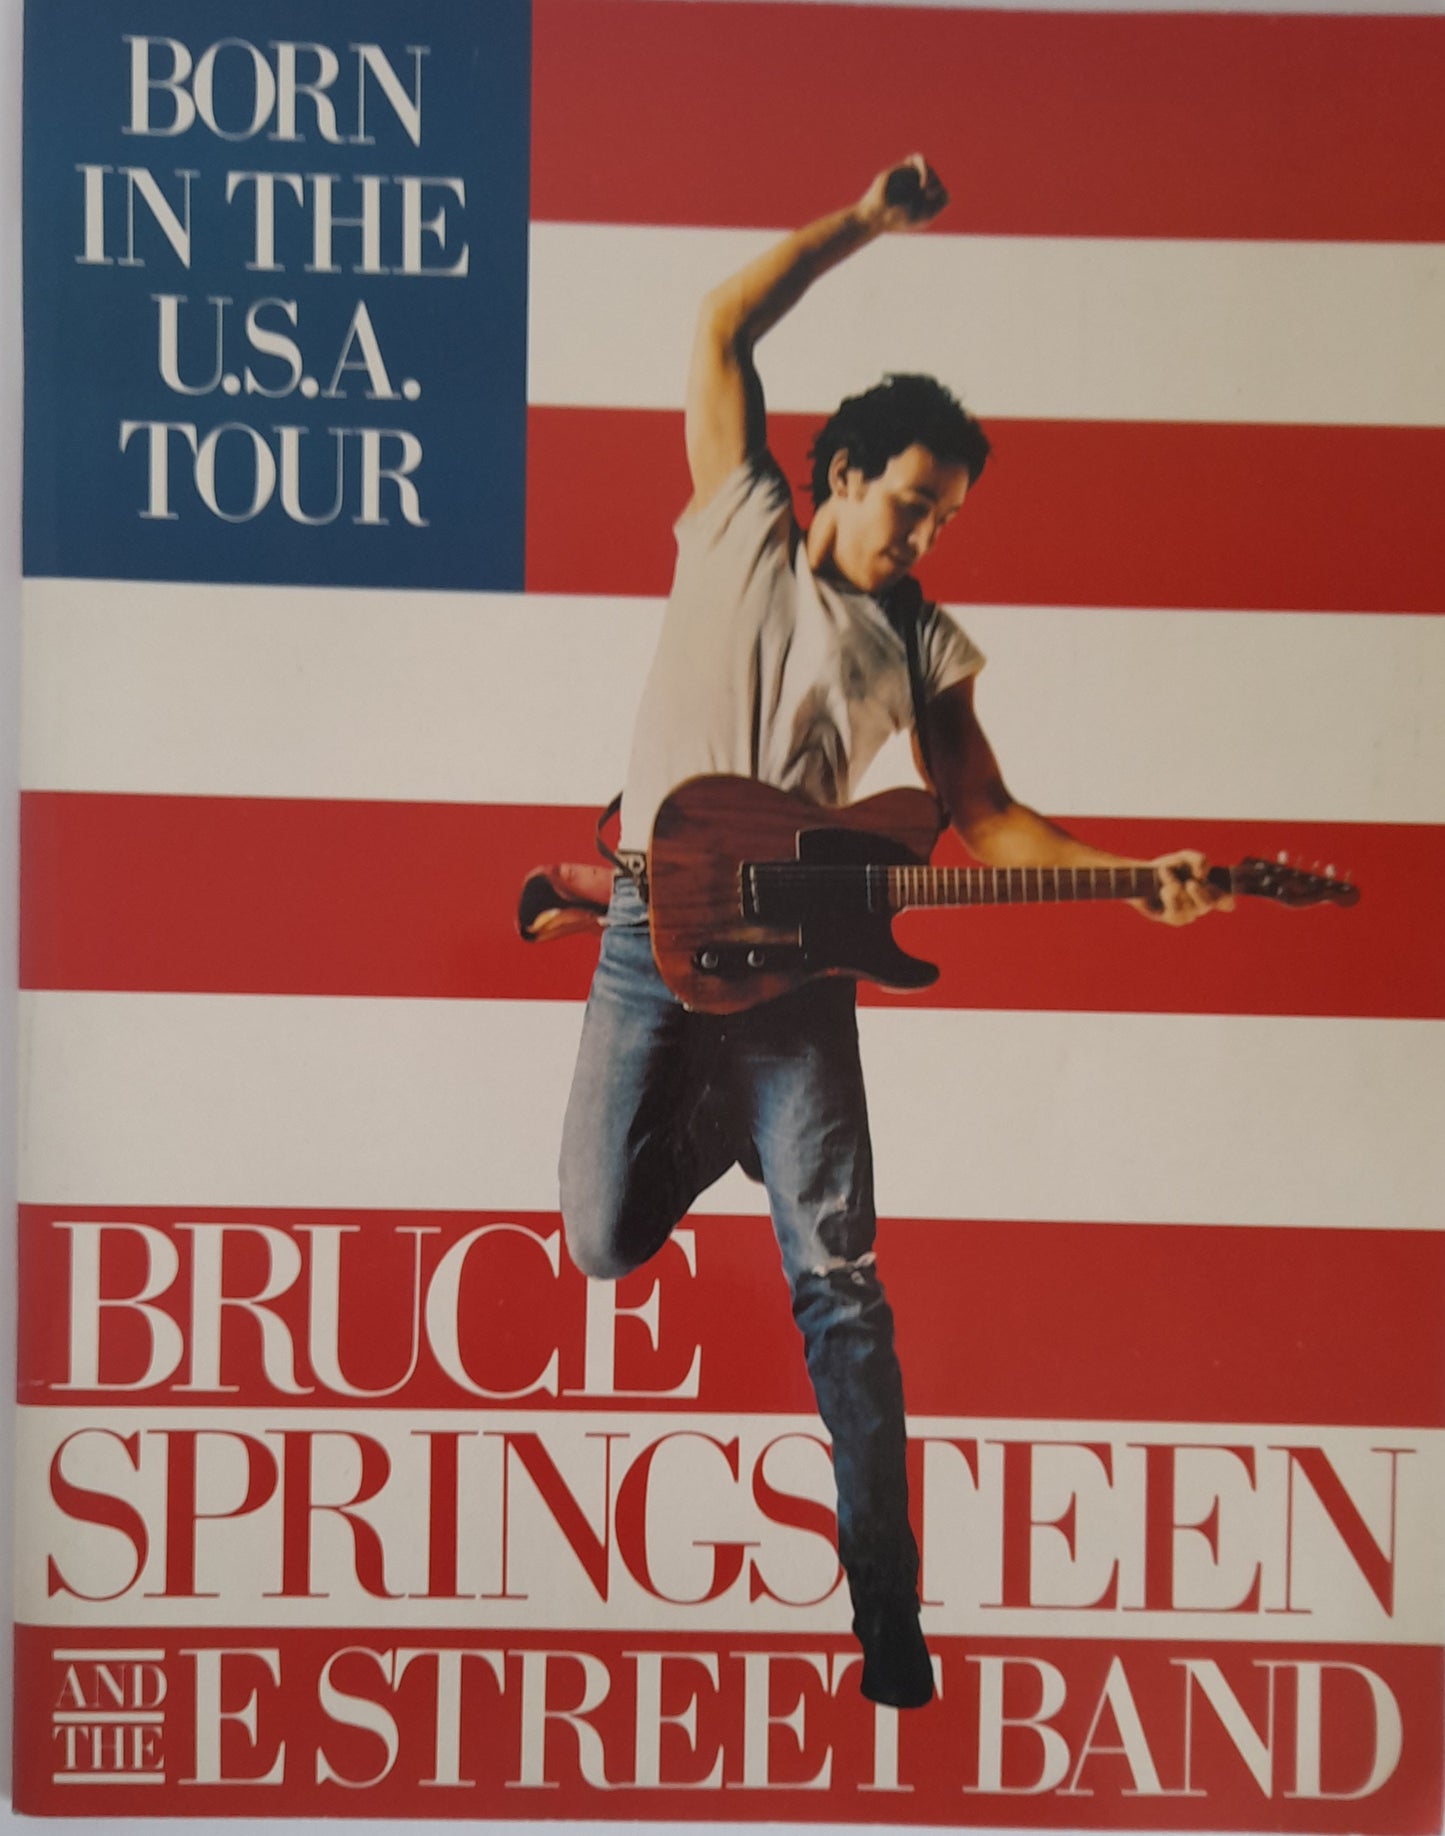 Bruce Springsteen - Born in the USA Tour